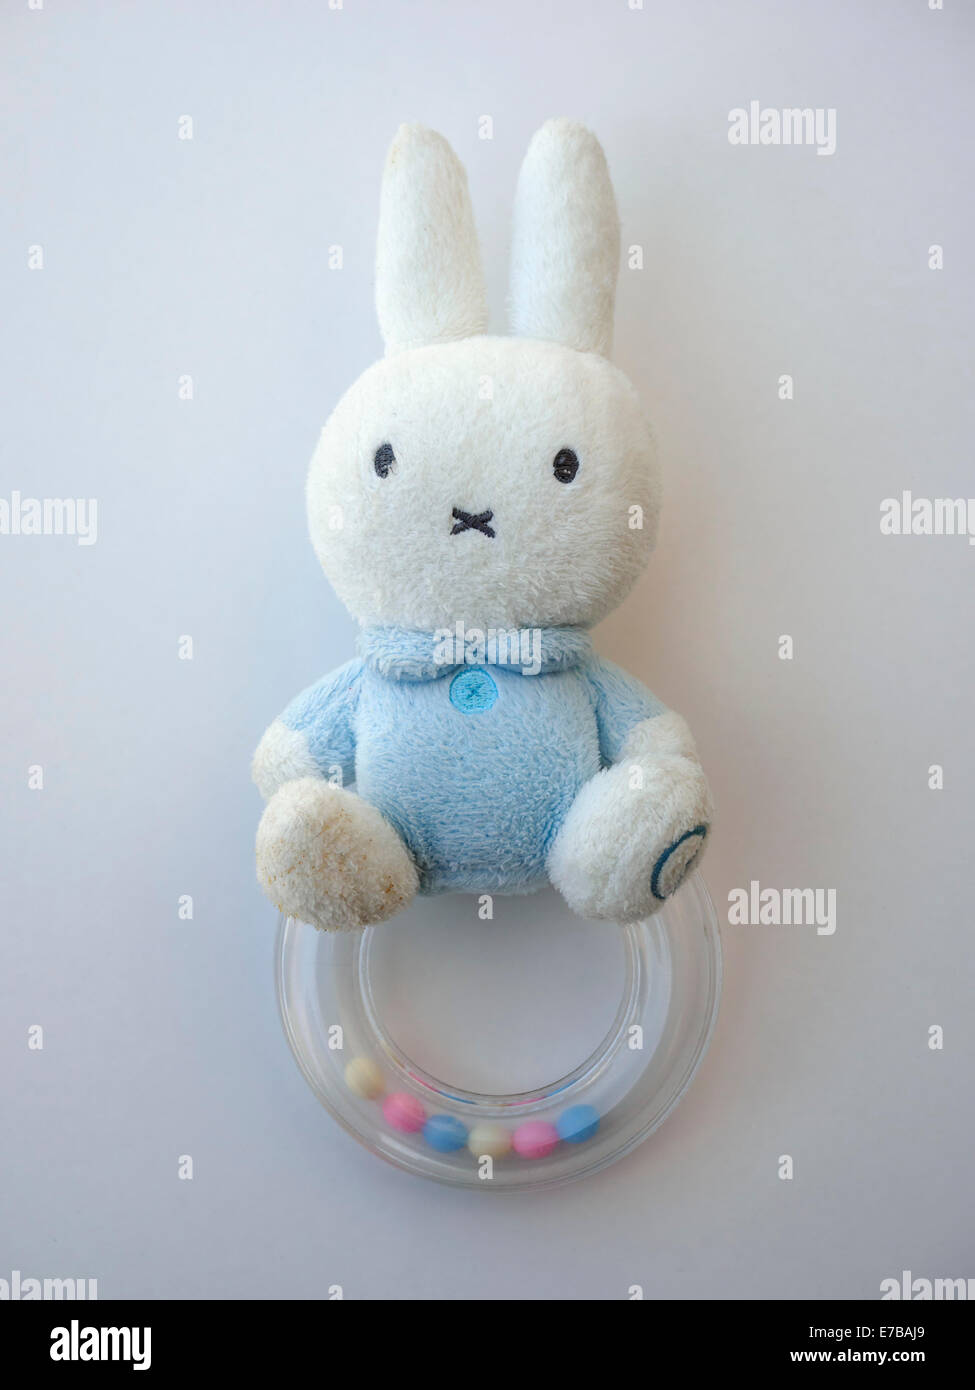 Cute Miffy baby toy cut out isolated on white background Stock Photo